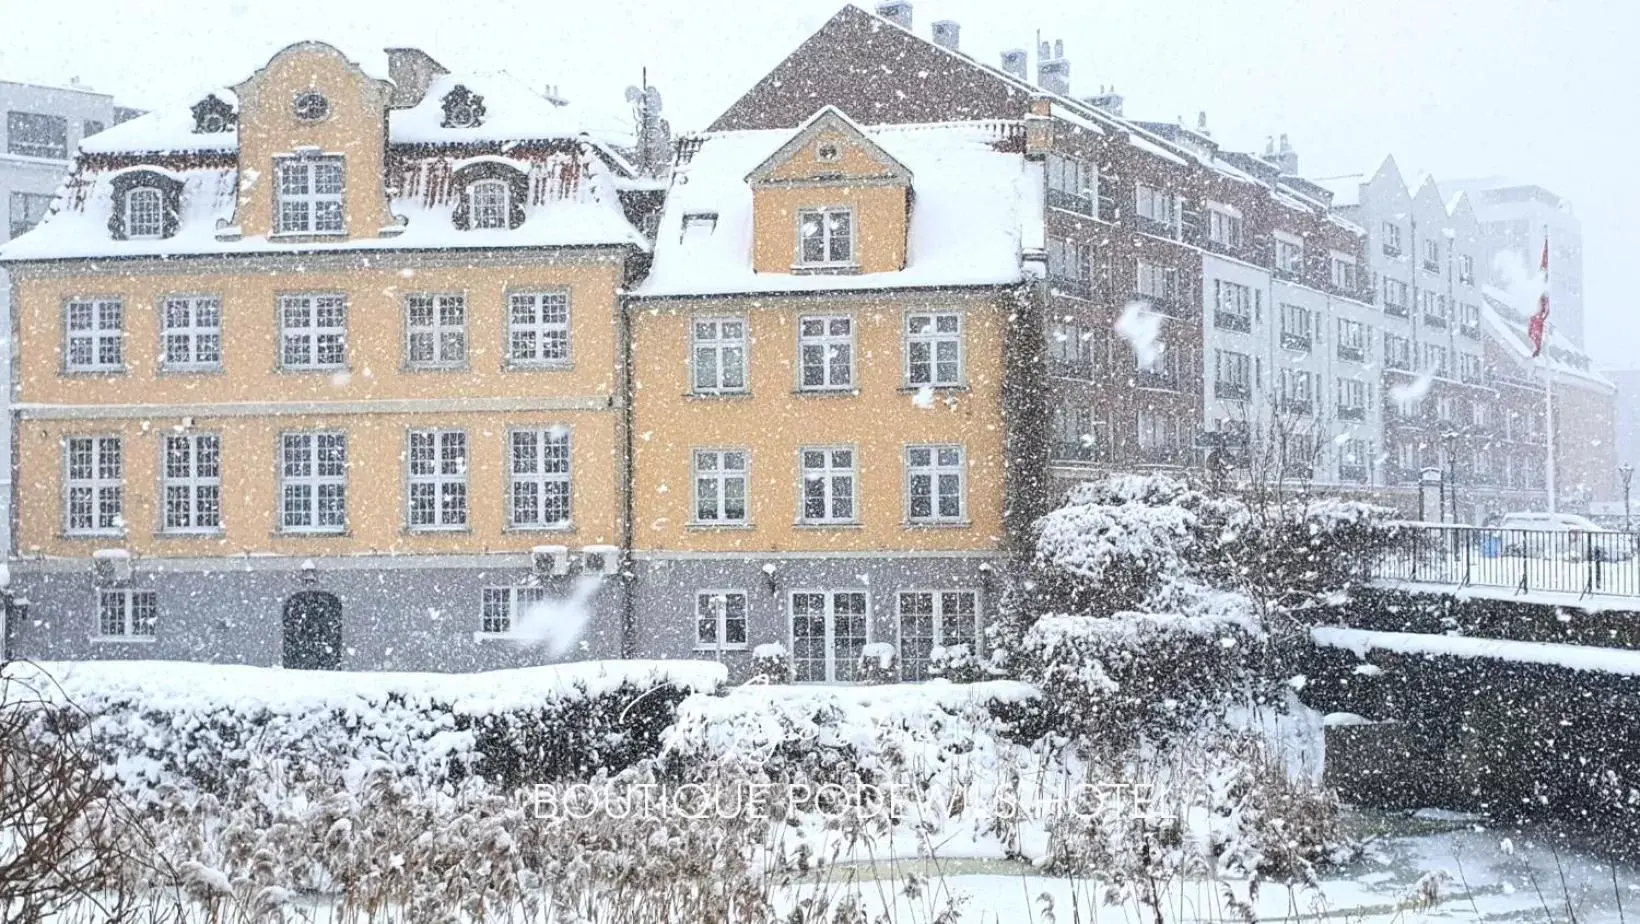 Property building, Winter in Podewils Old Town Gdansk